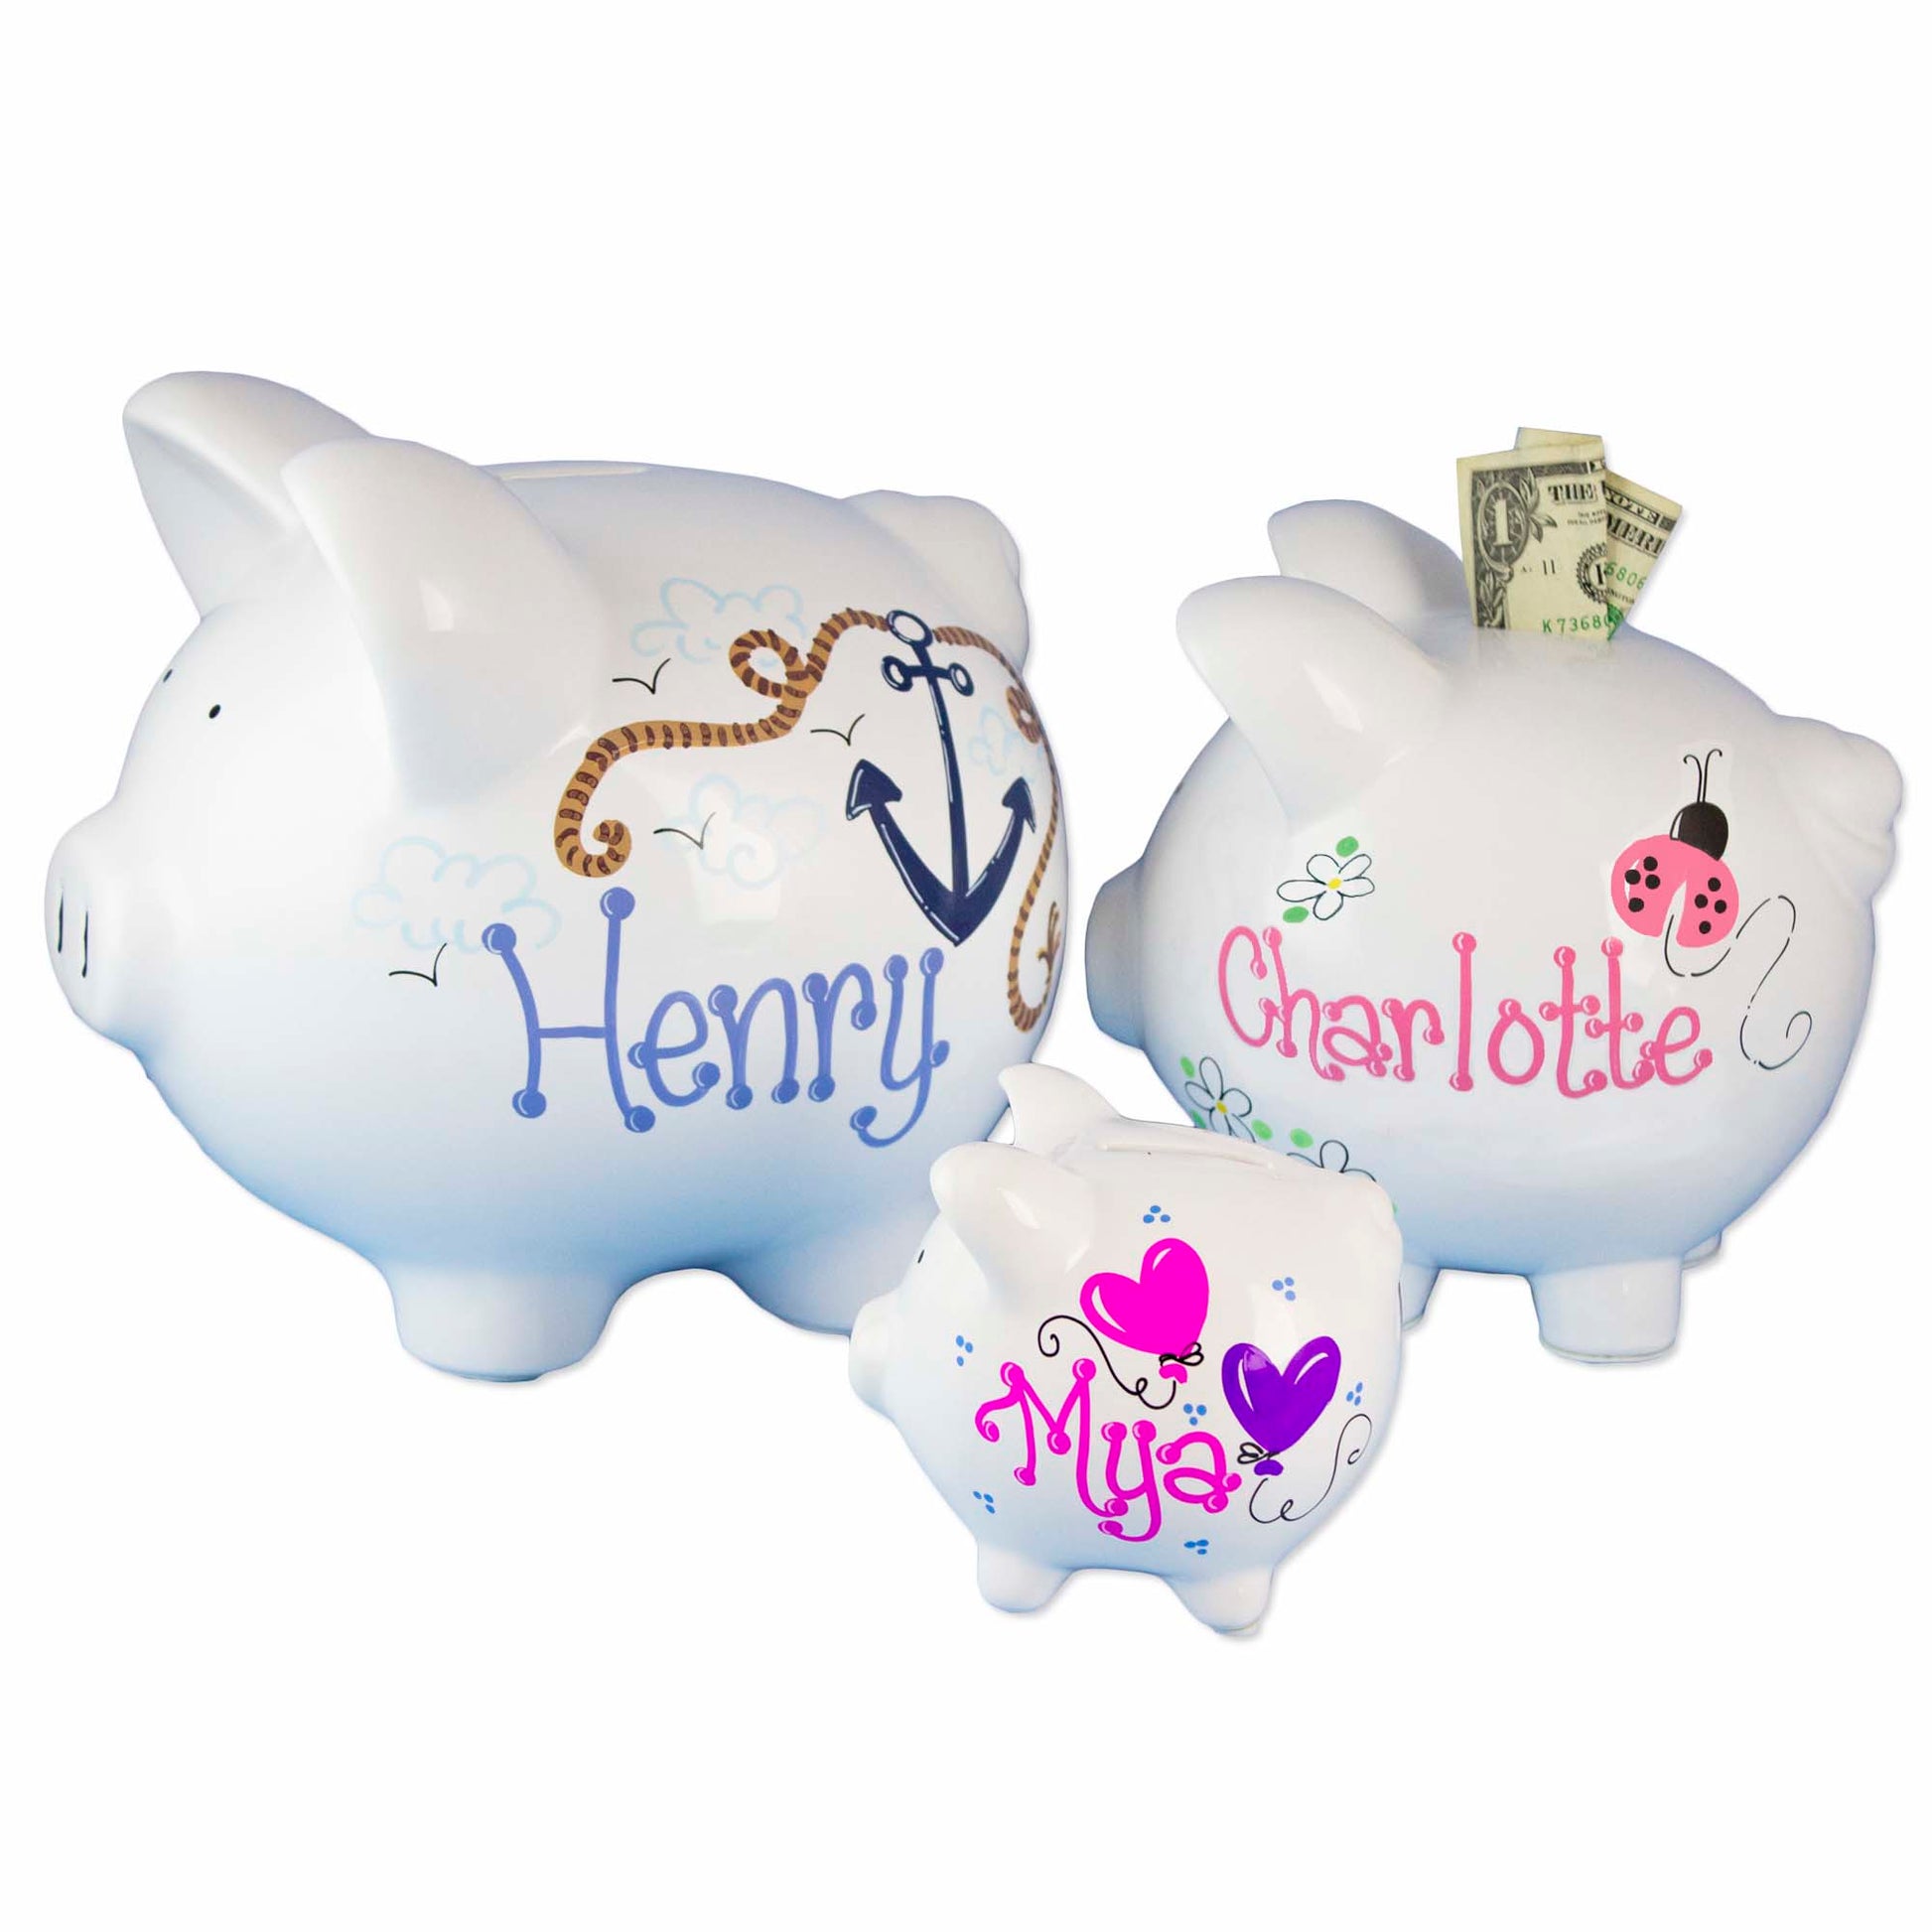 Handpainted childs piggy bank crayons primary